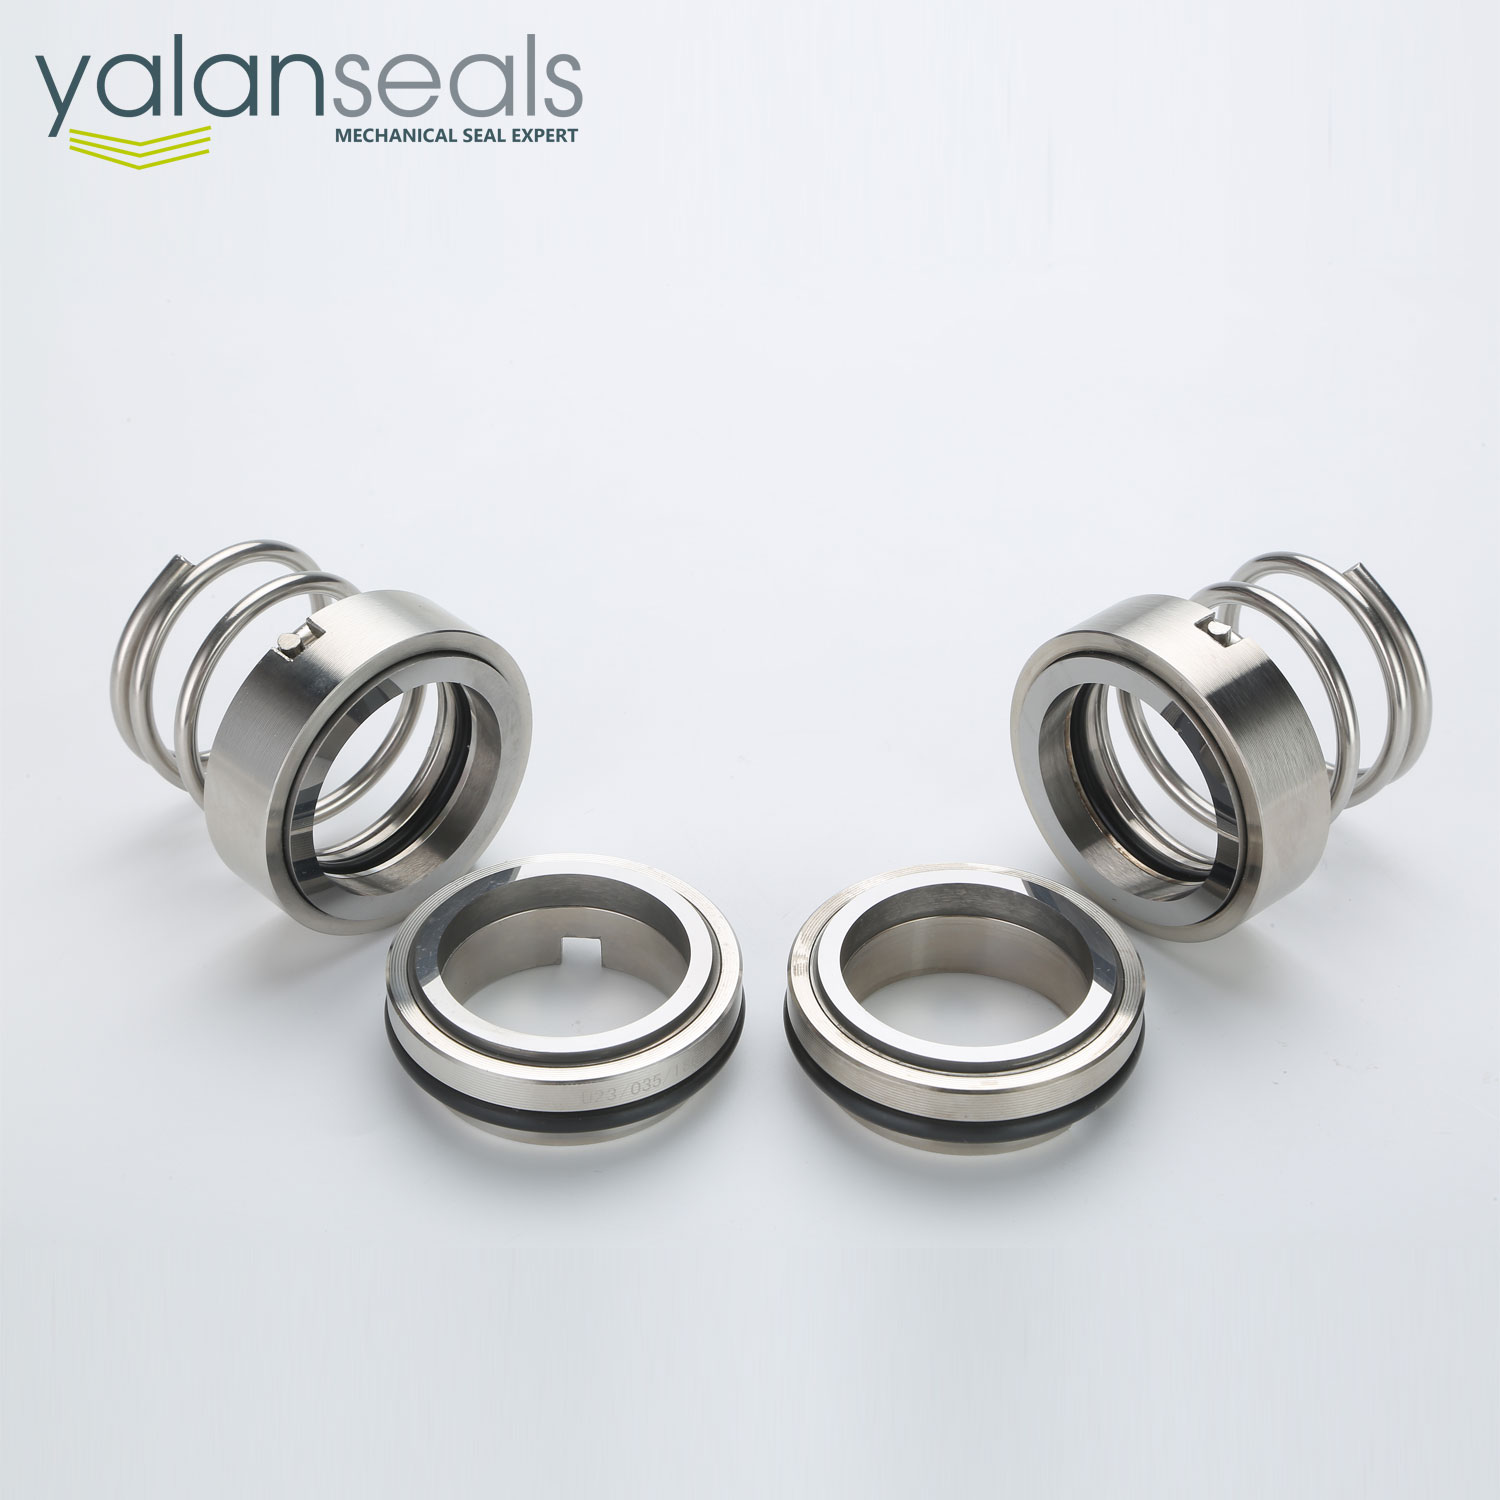 YALAN NDM Double Seals (2 NK) for Clean Water Pumps, Circulating Pumps and Vacuum Pumps